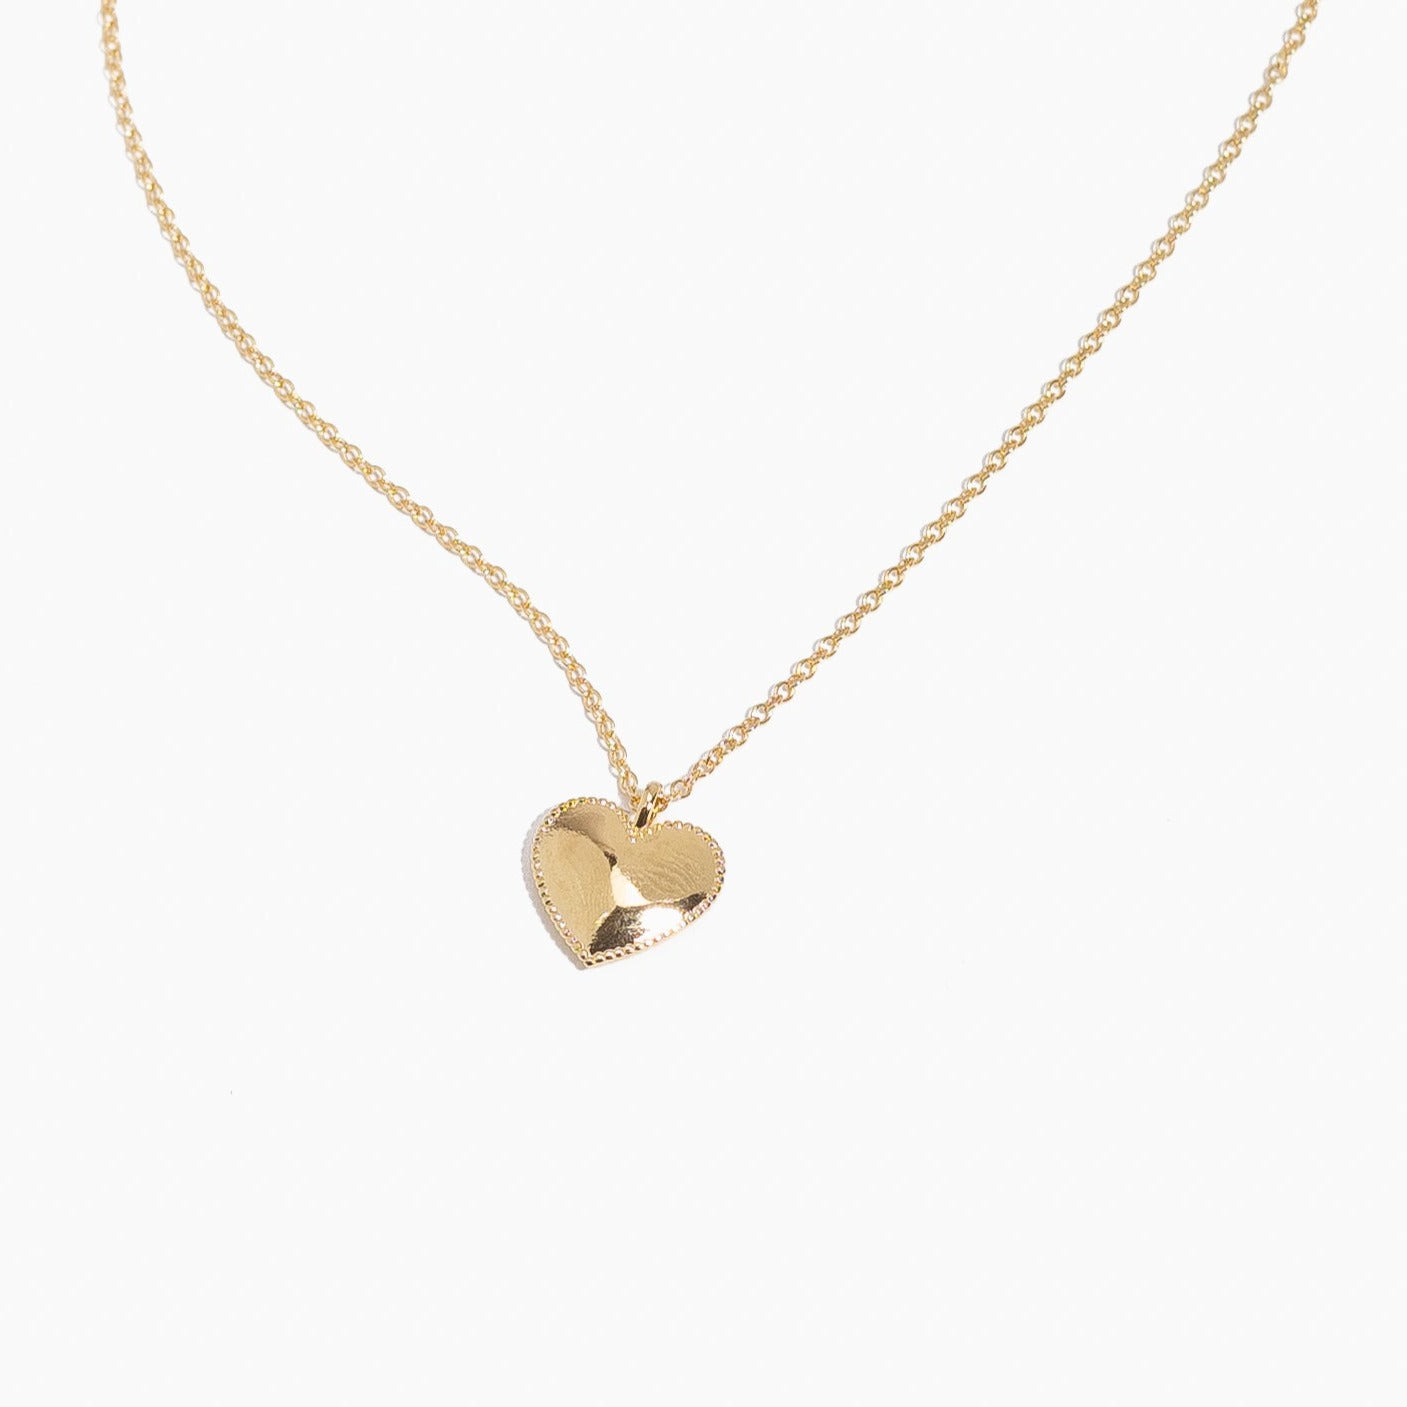 Gold Beaded Heart Necklace by Katie Dean Jewelry, made in America, perfect for the dainty minimal jewelry lovers 